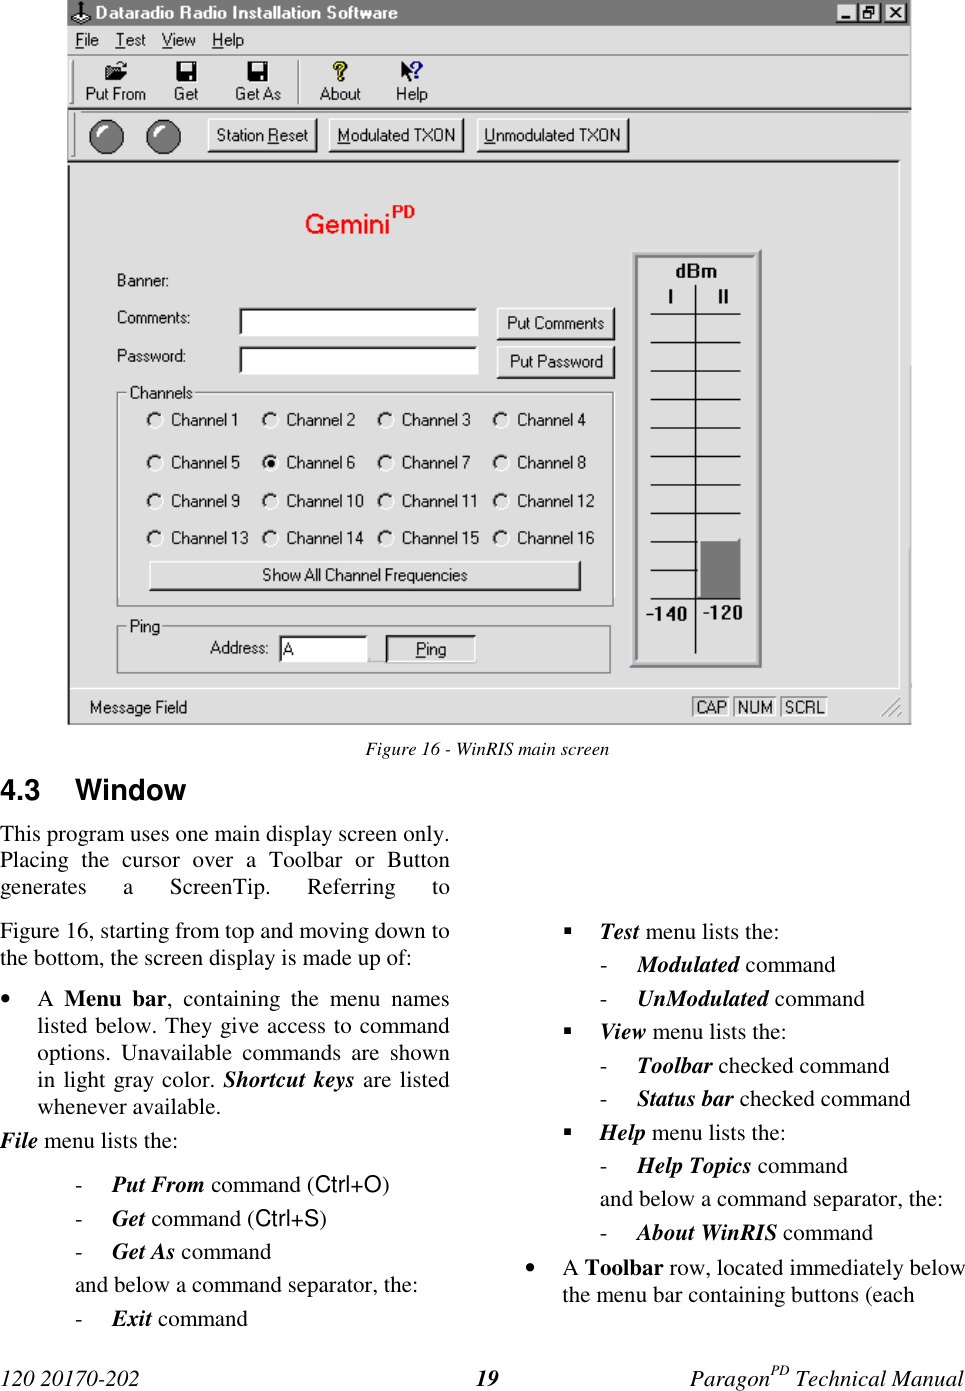 120 20170-202 ParagonPD Technical Manual19Figure 16 - WinRIS main screen4.3 WindowThis program uses one main display screen only.Placing the cursor over a Toolbar or Buttongenerates a ScreenTip. Referring toFigure 16, starting from top and moving down tothe bottom, the screen display is made up of:• A  Menu bar, containing the menu nameslisted below. They give access to commandoptions. Unavailable commands are shownin light gray color. Shortcut keys are listedwhenever available.File menu lists the:- Put From command (Ctrl+O)- Get command (Ctrl+S)- Get As commandand below a command separator, the:- Exit command! Test menu lists the:- Modulated command- UnModulated command! View menu lists the:- Toolbar checked command- Status bar checked command! Help menu lists the:- Help Topics commandand below a command separator, the:- About WinRIS command• A Toolbar row, located immediately belowthe menu bar containing buttons (each